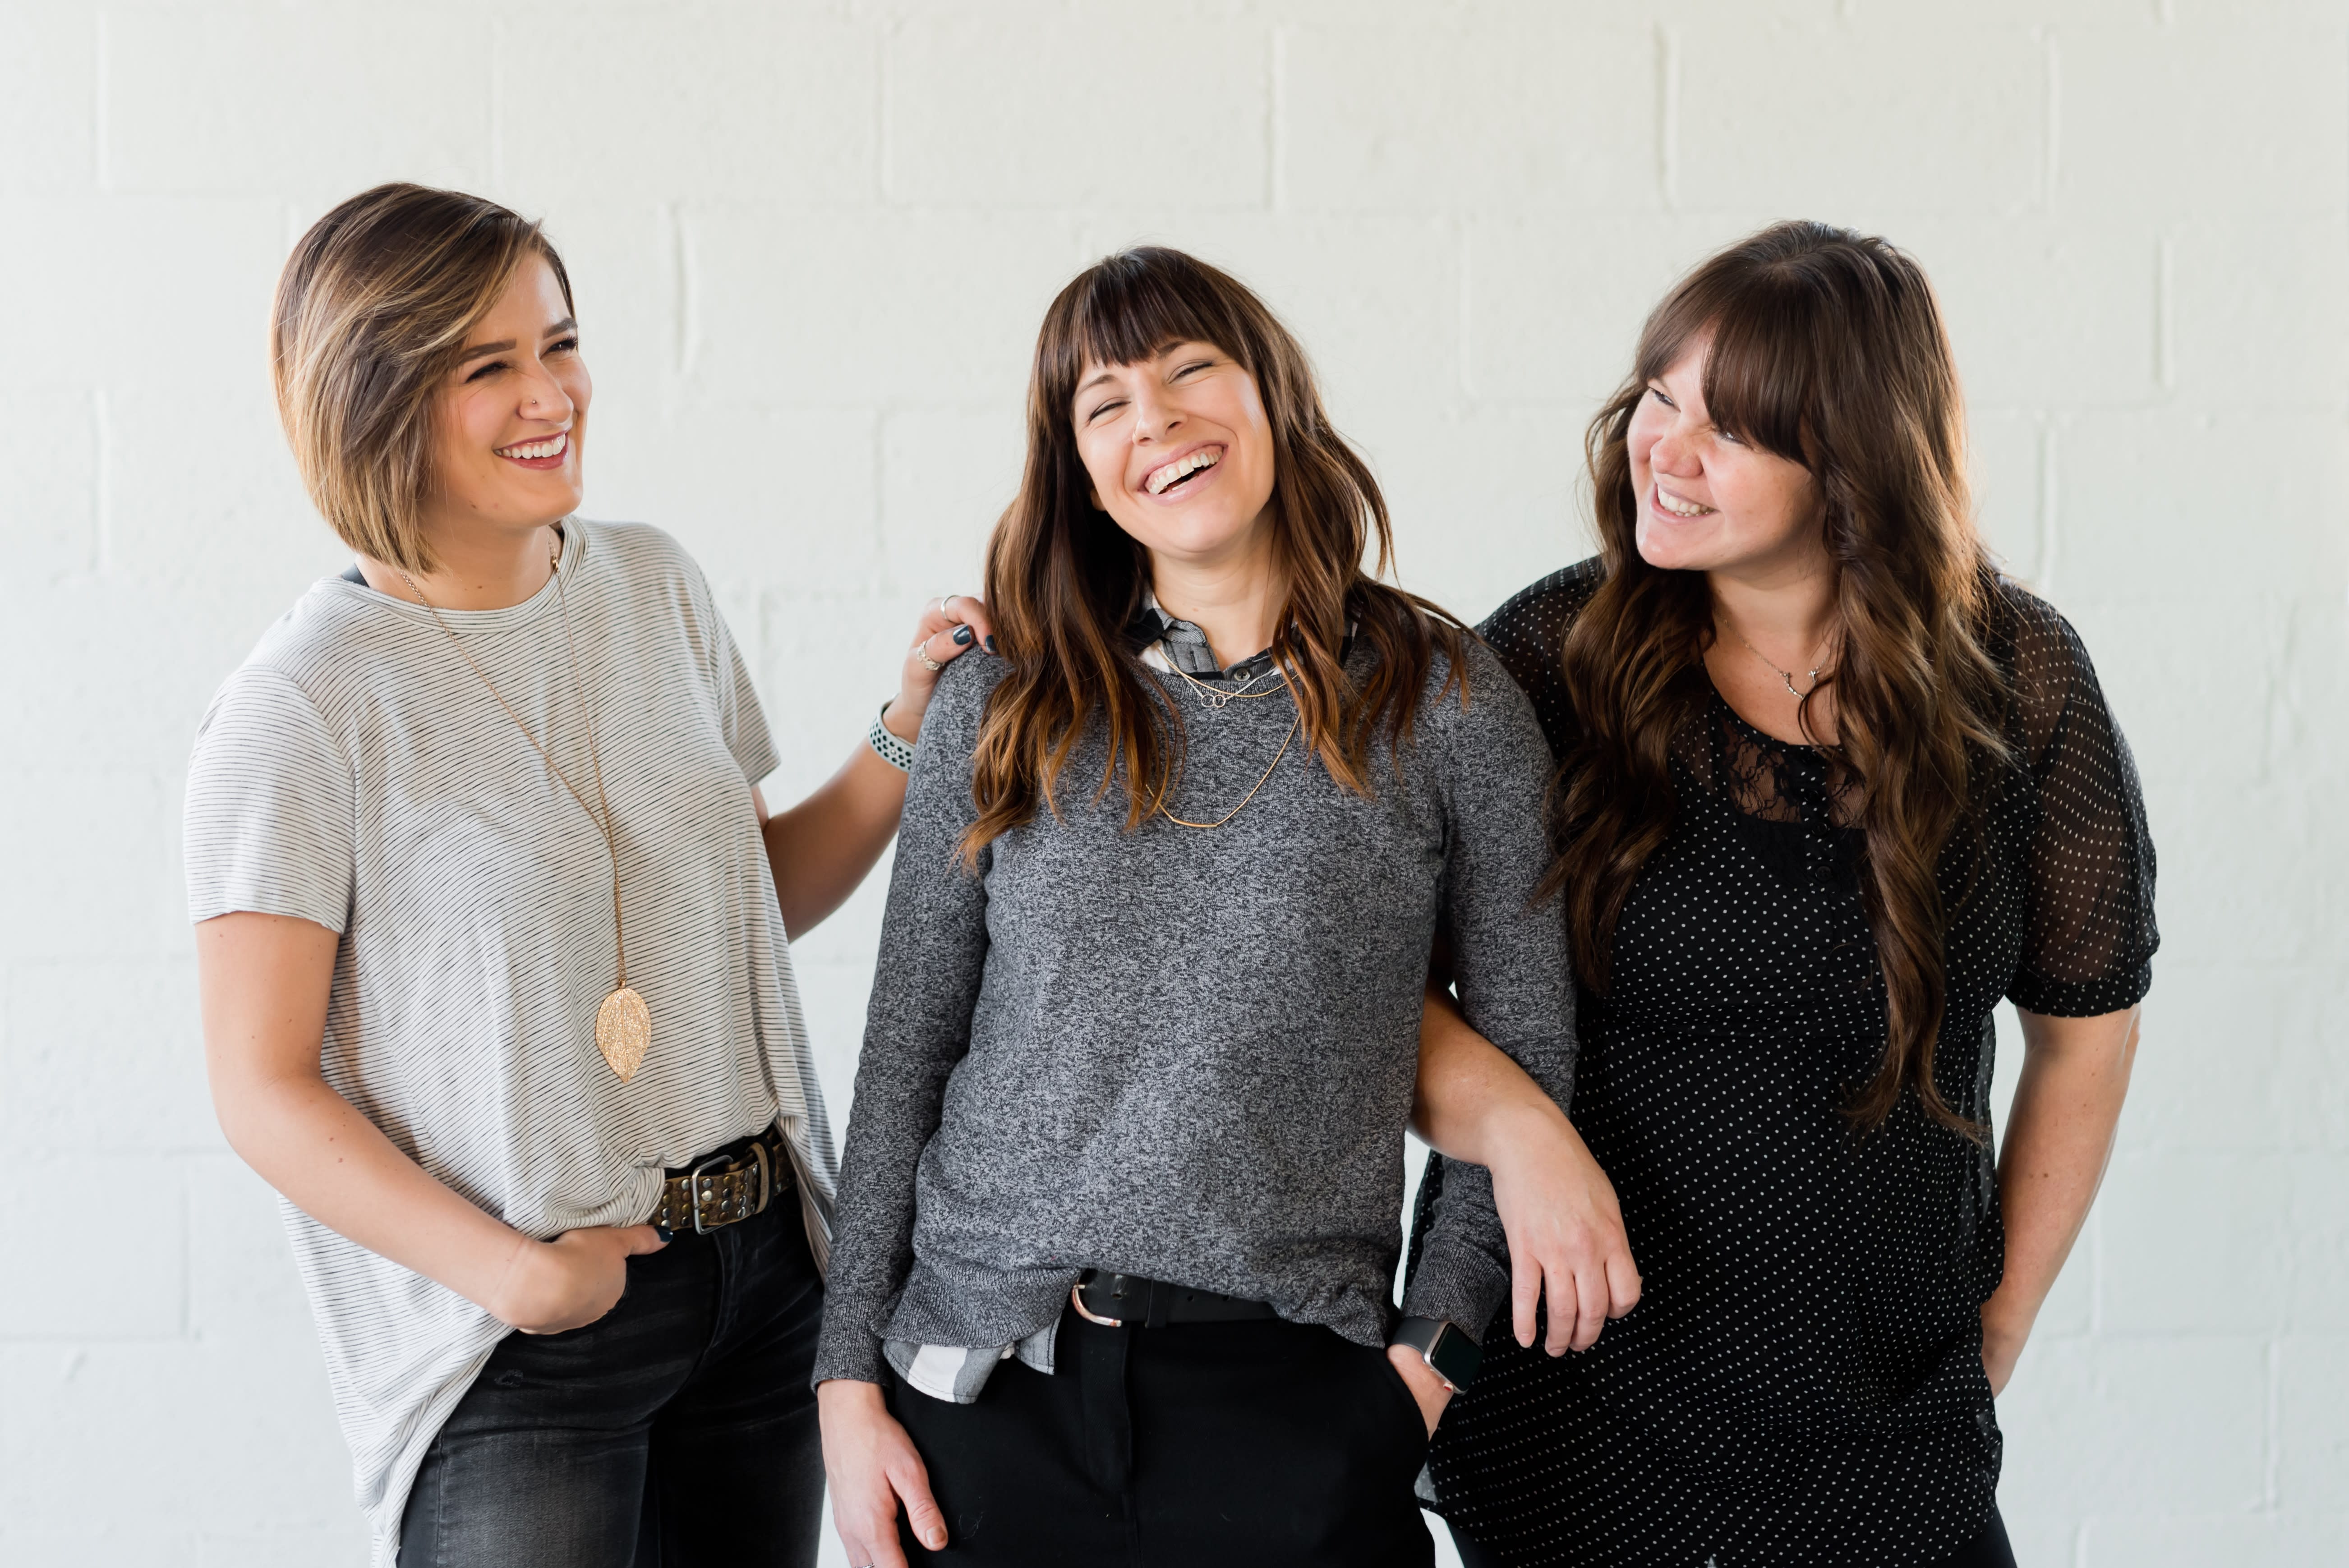 Strong women, female business owners share a laugh as they discuss trendy topics and enjoy life. Kulør Hair Design and Color Studio is the best place for hair styling, located at 22 East Center Street in Logan, Utah. https://www.instagram.com/kulorsalon/ https://www.kulorsalon.com/ 435-213-9075 https://www.aveda.com/salon/KulorSalon https://www.instagram.com/AwCreativeUT/ https://www.AwCreativeUT.com/ #AwCreativeUT Adam Winger #awcreative #AdamWinger